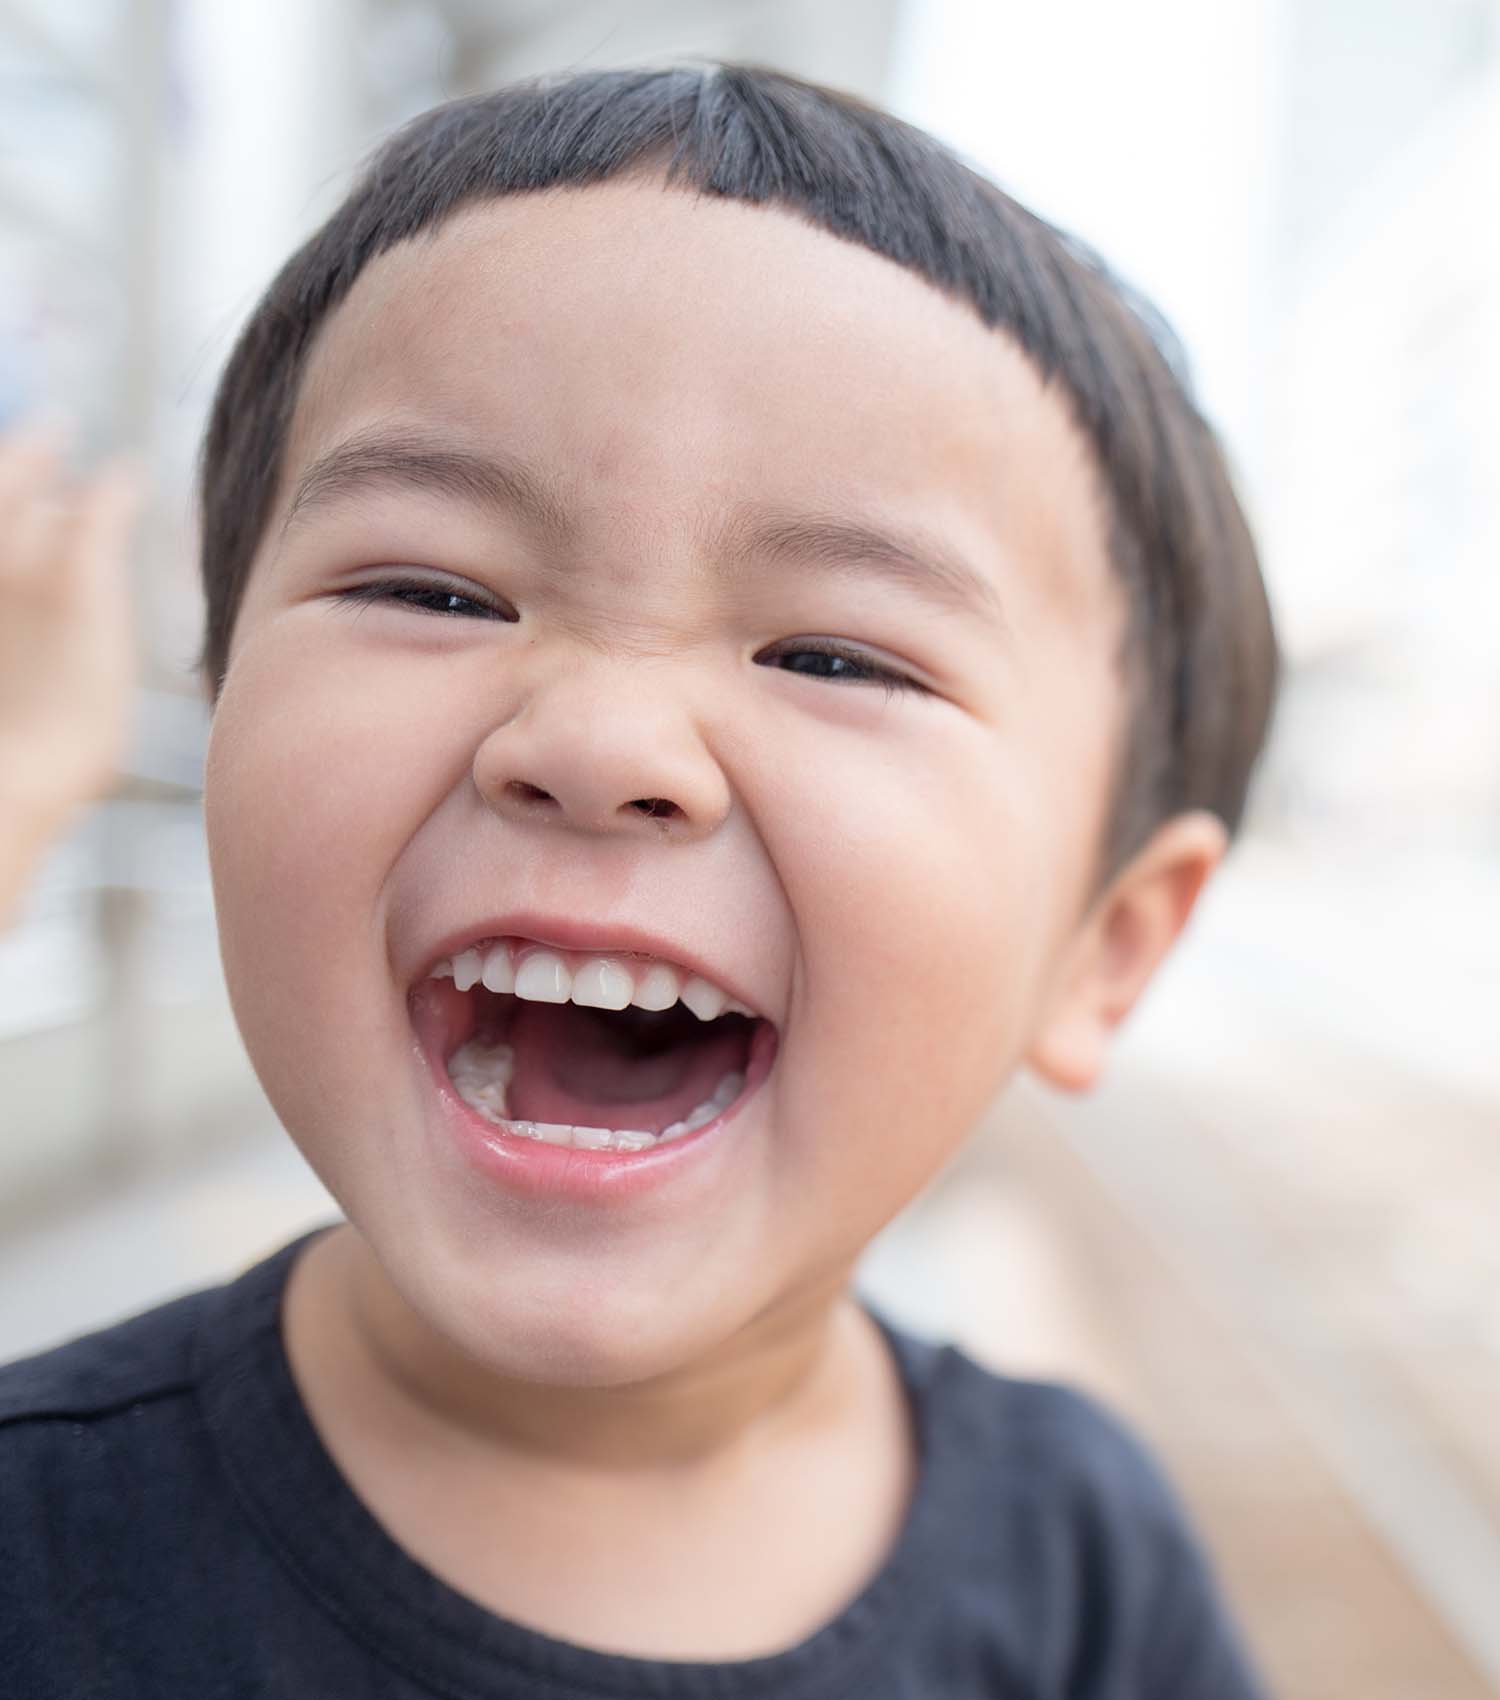 Young boy laughing